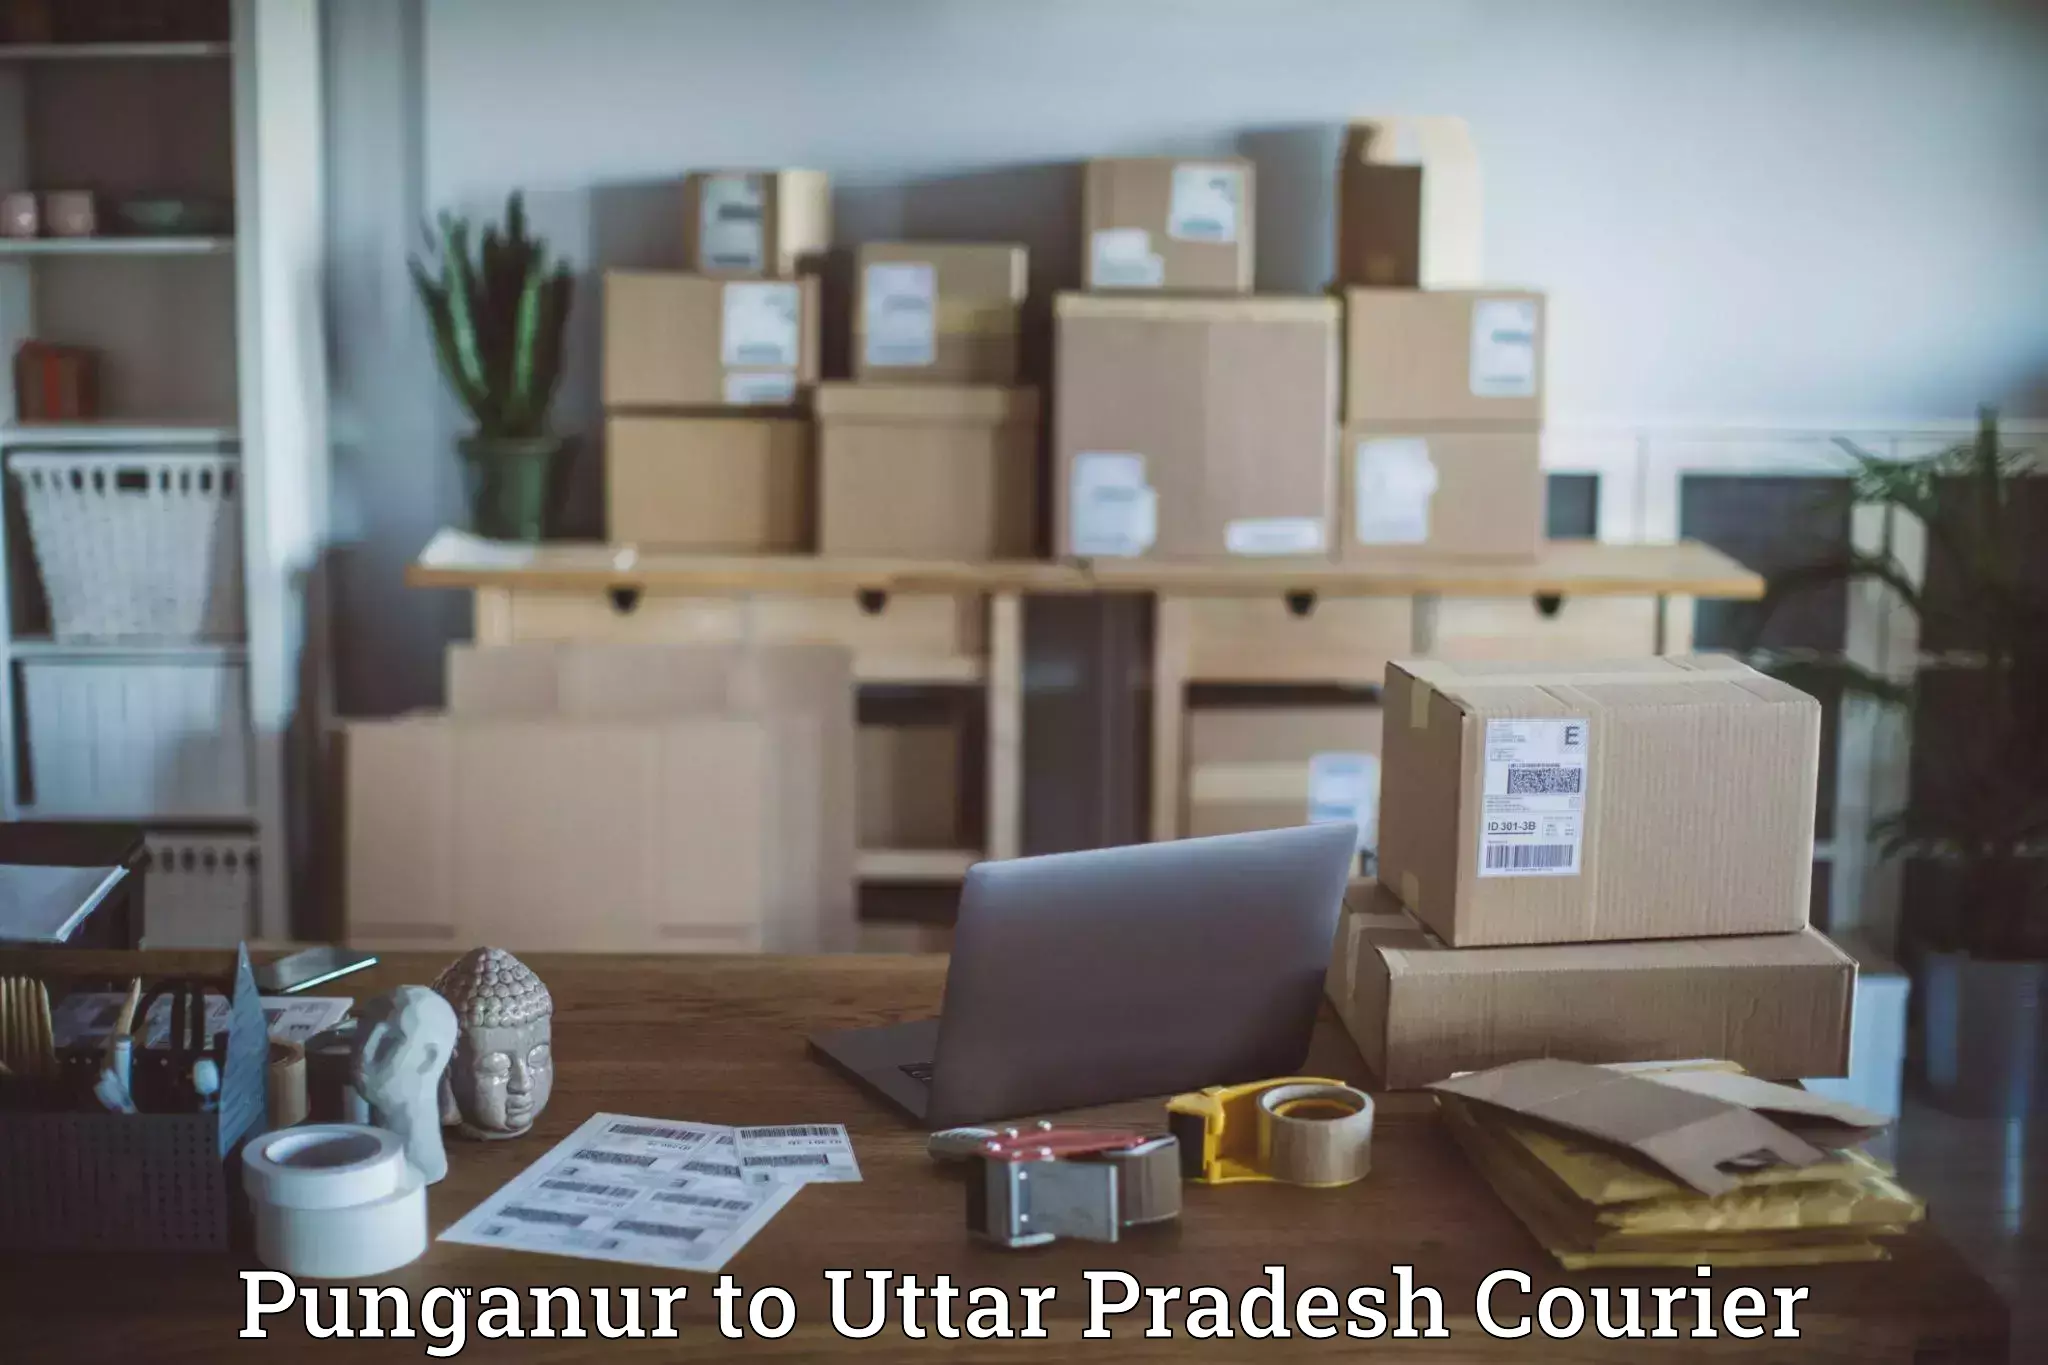 State-of-the-art courier technology Punganur to Dhaurahara